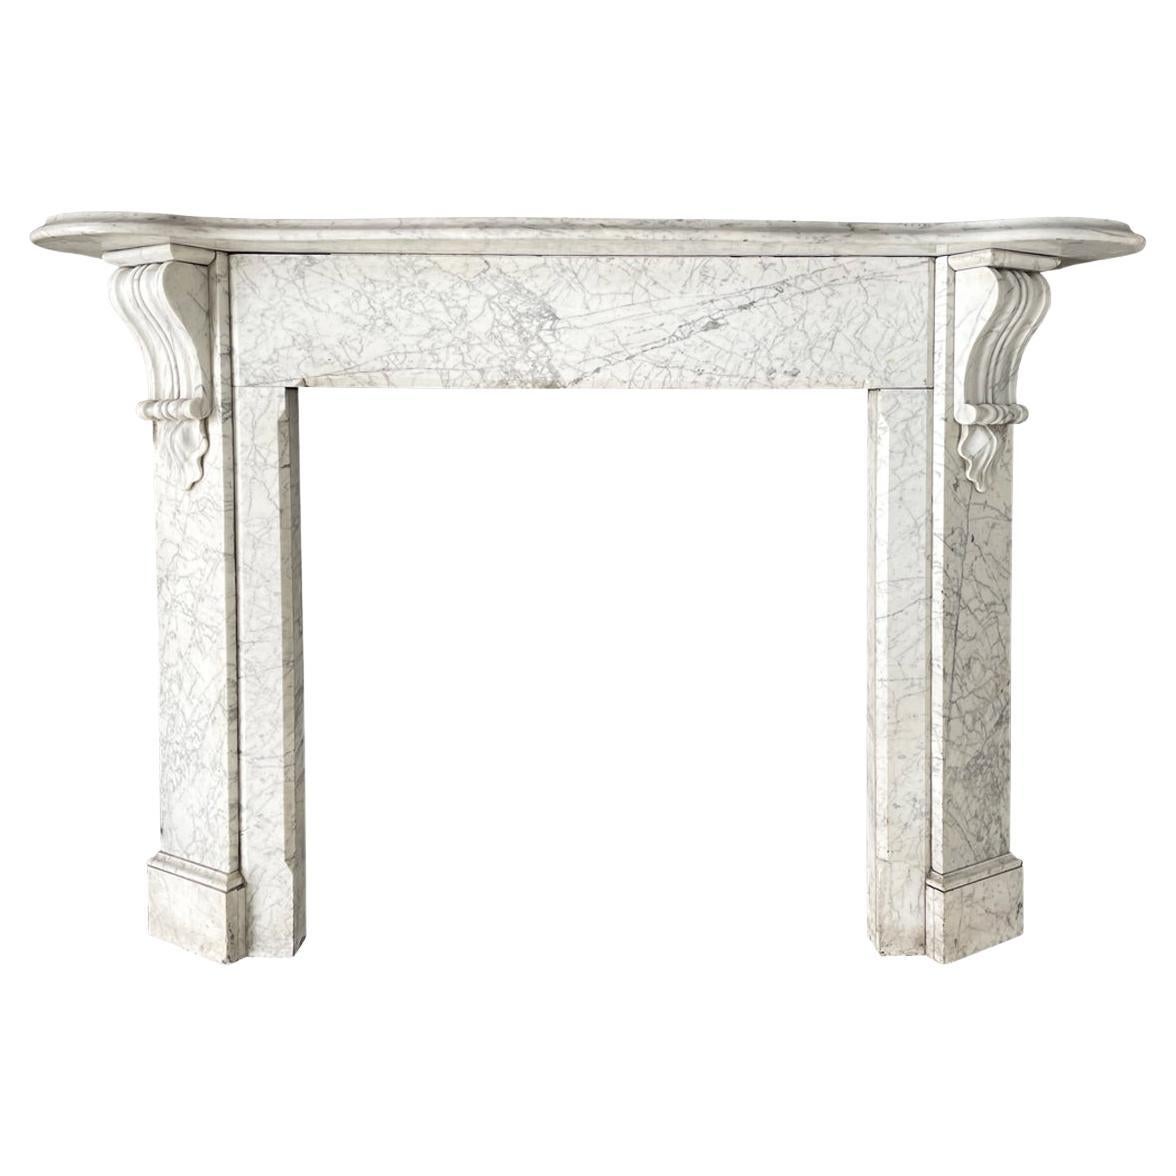 Corbelled Victorian Carrara Marble Fireplace Surround For Sale